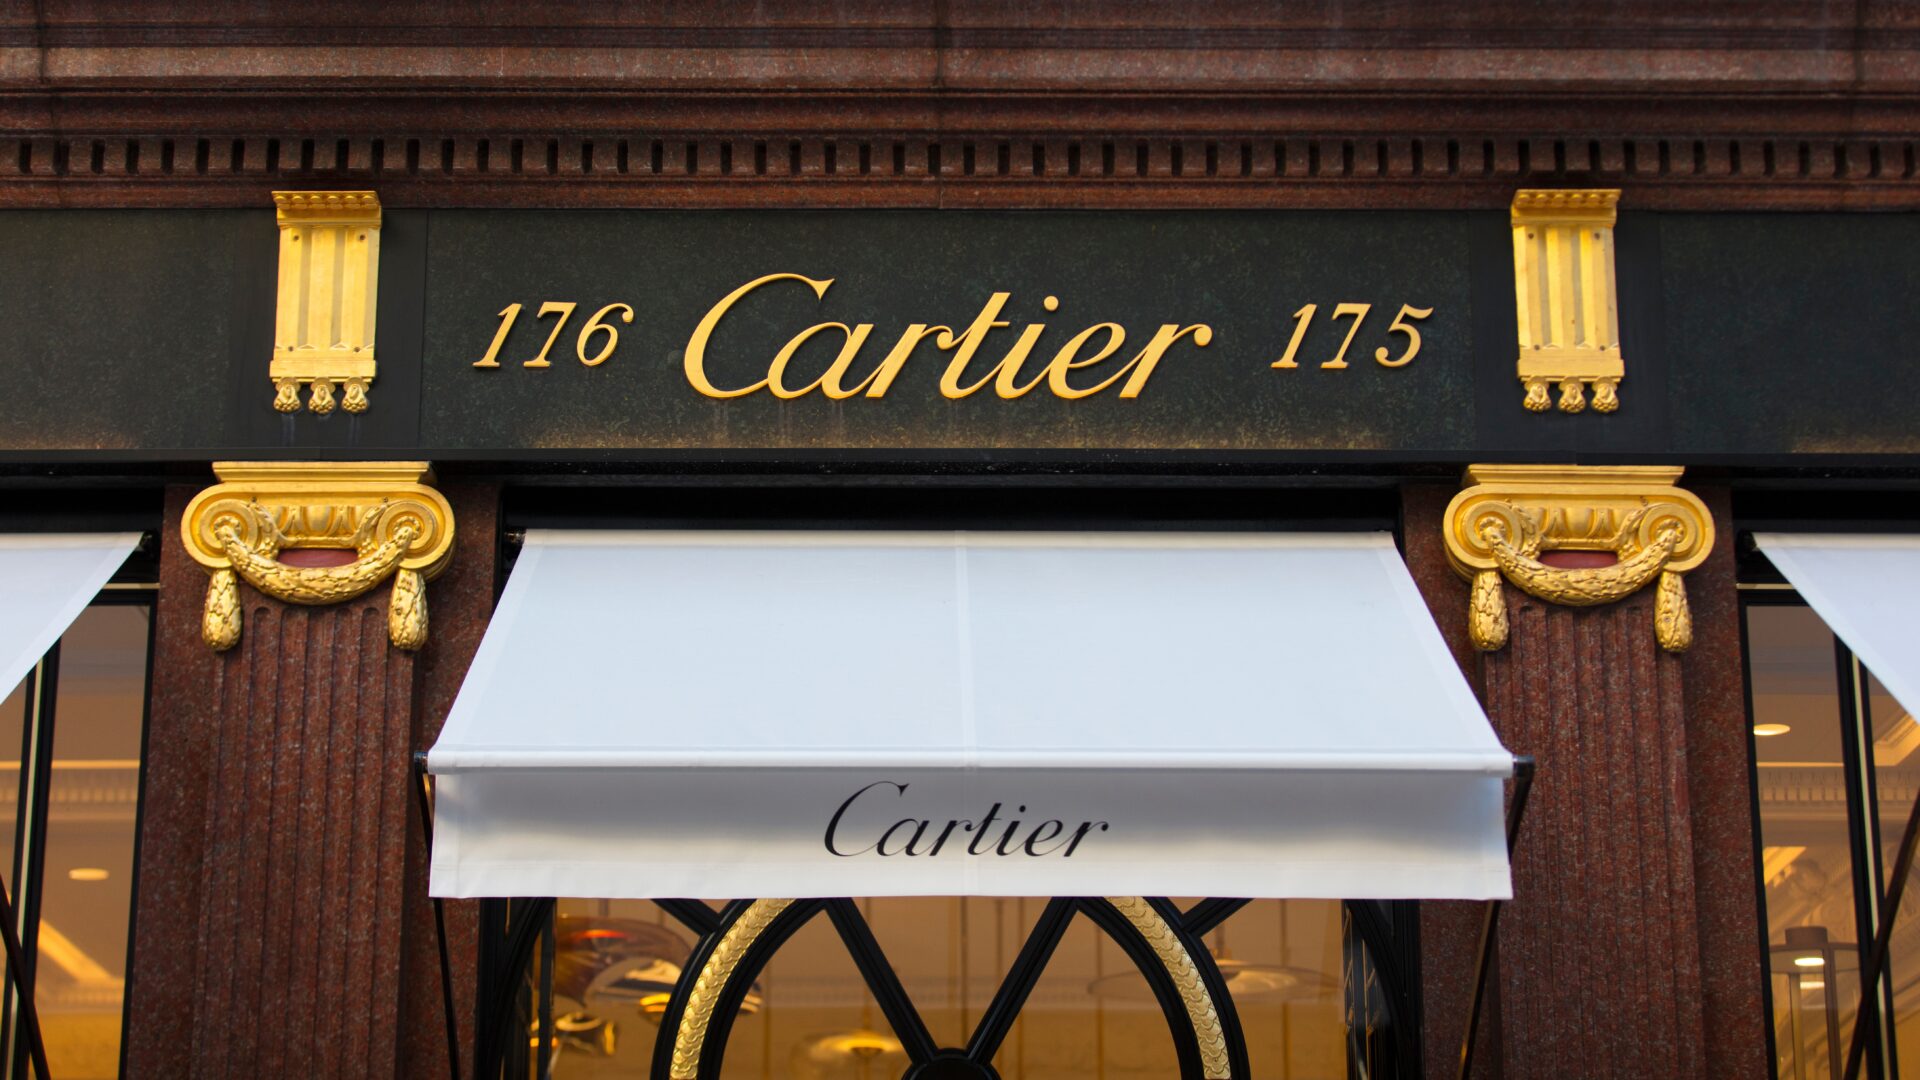 cartier store front